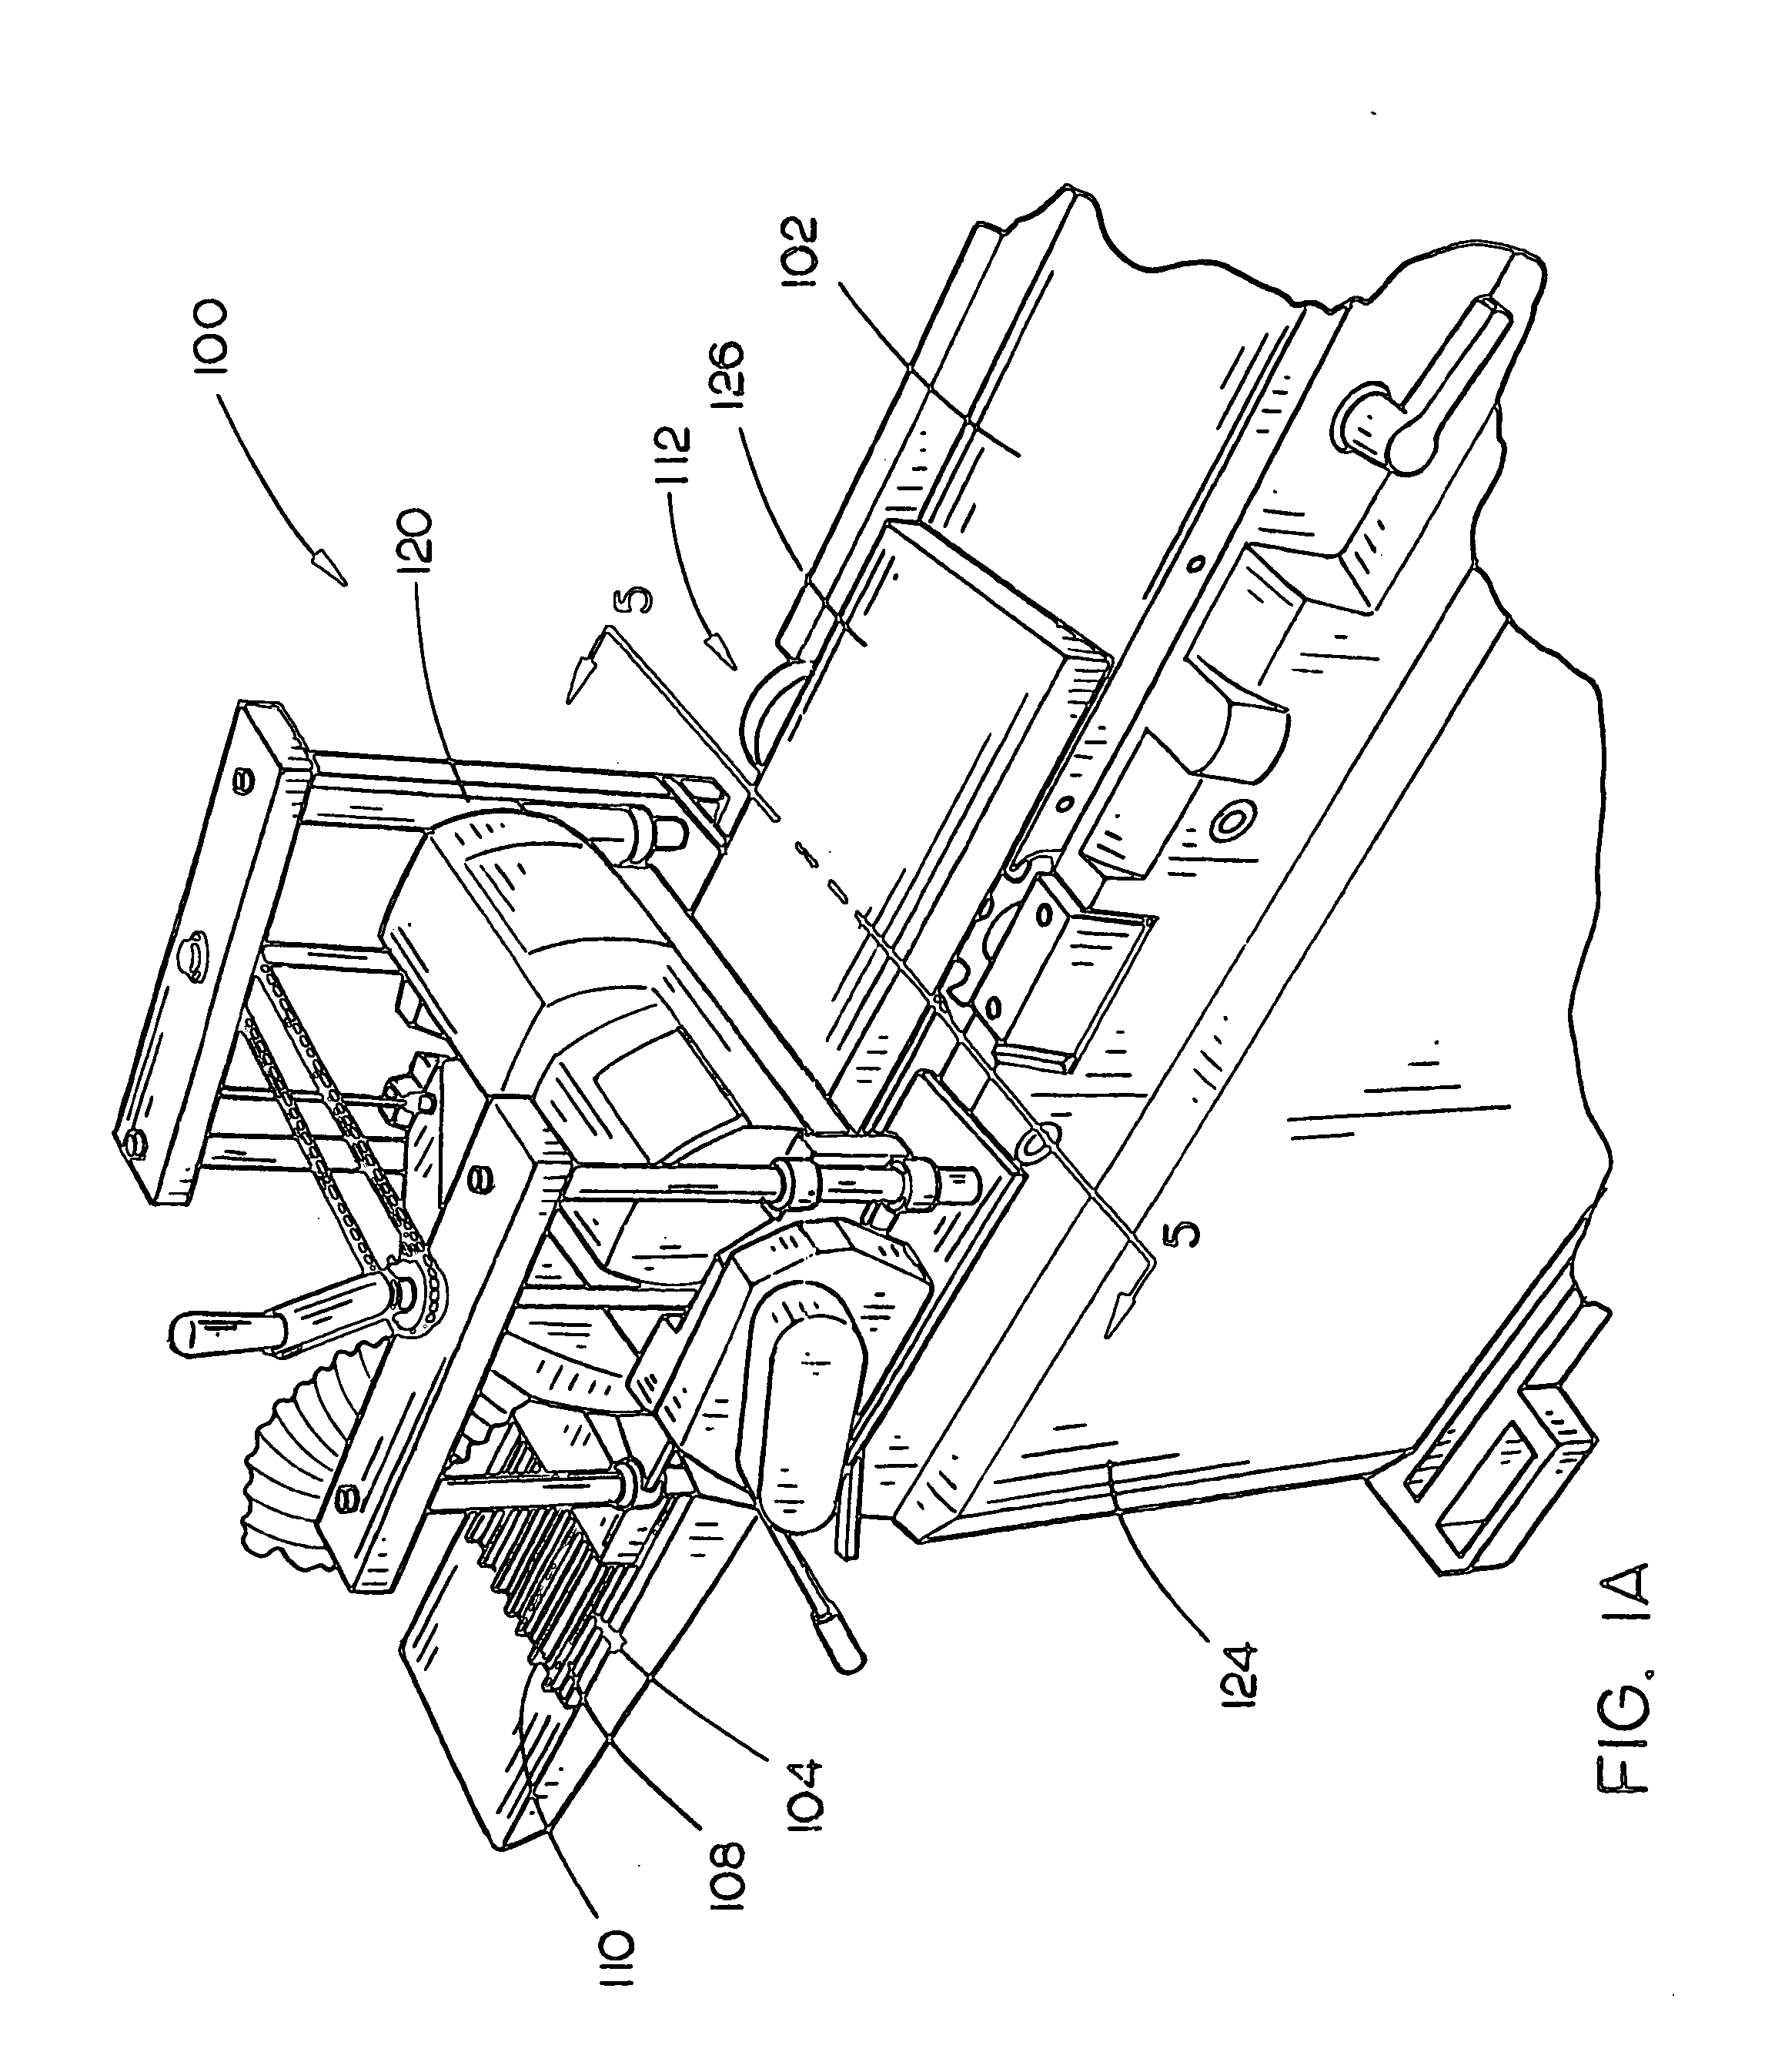 Apparatus and method for creating a flat surface on a workpiece